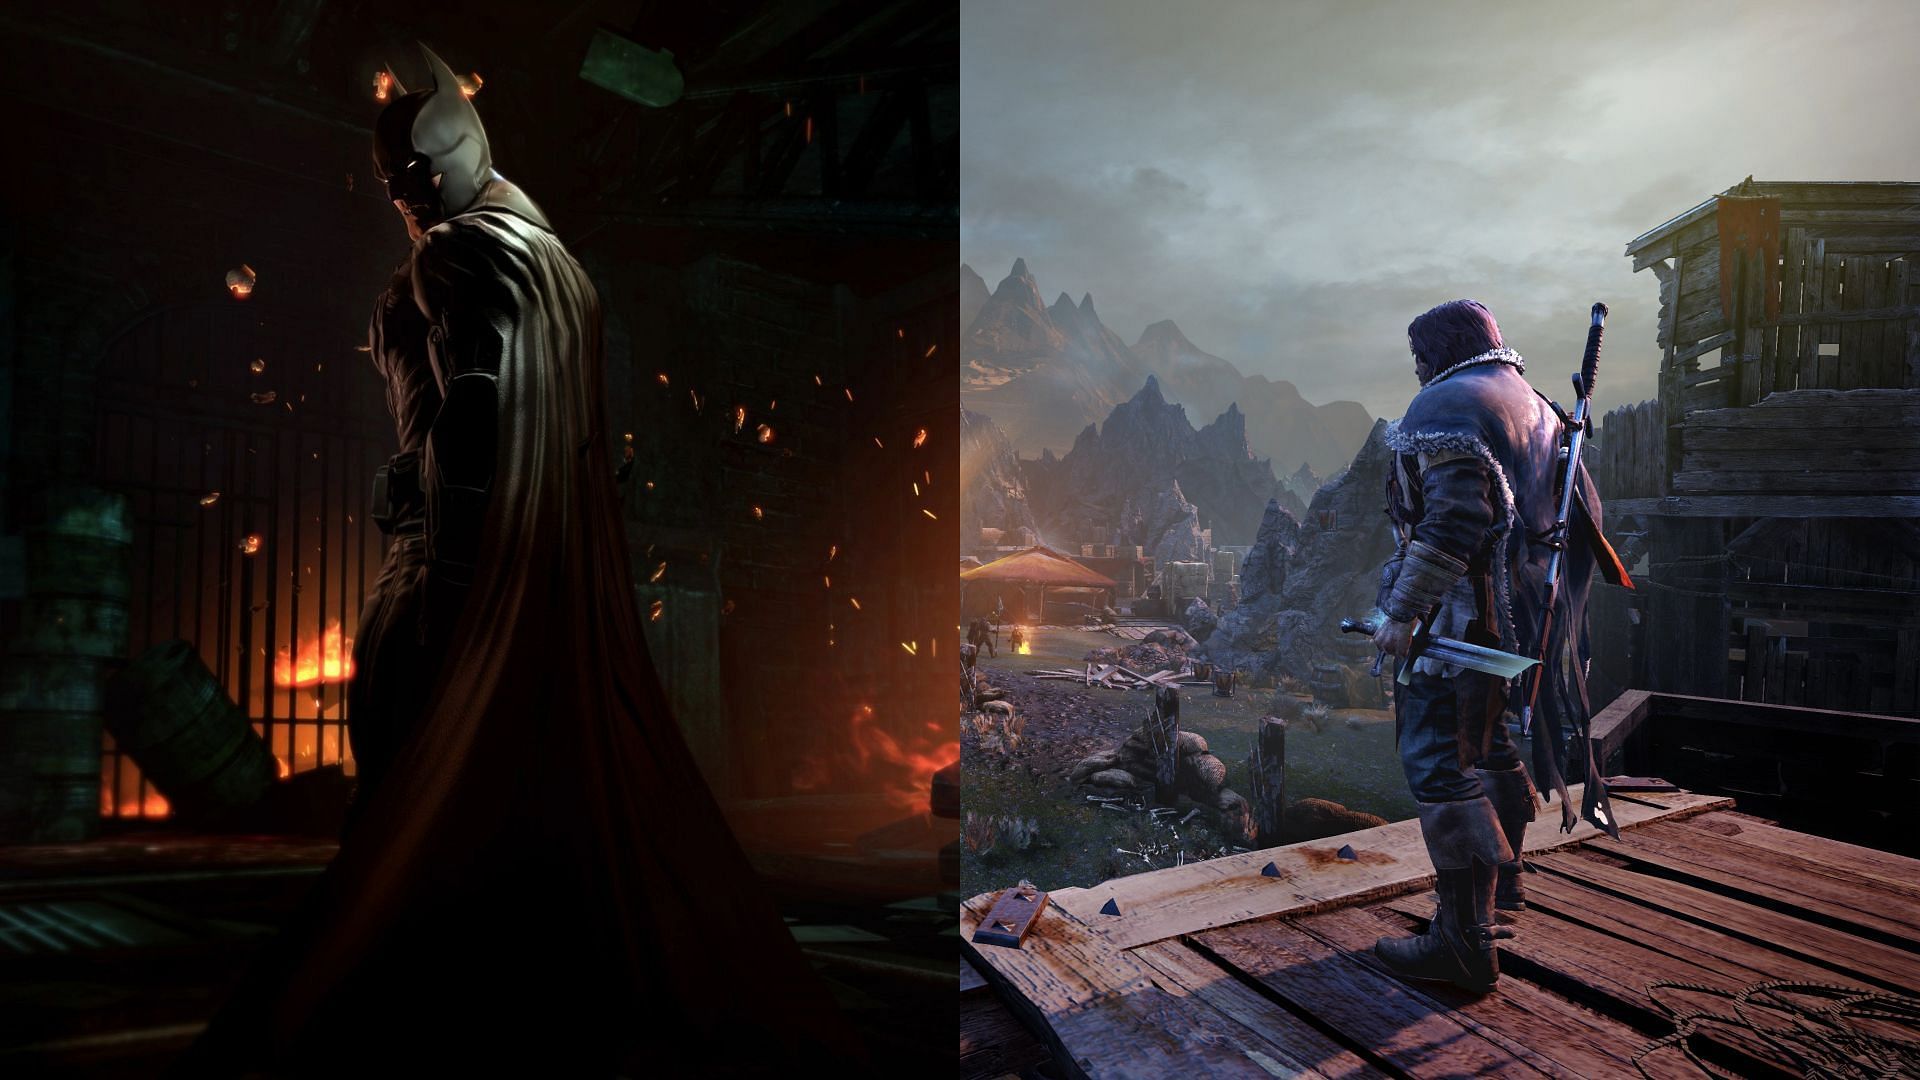 Monolith Productions was working on a Batman game prior to Shadow of Mordor (Image via WB Games, Monolith Productions)